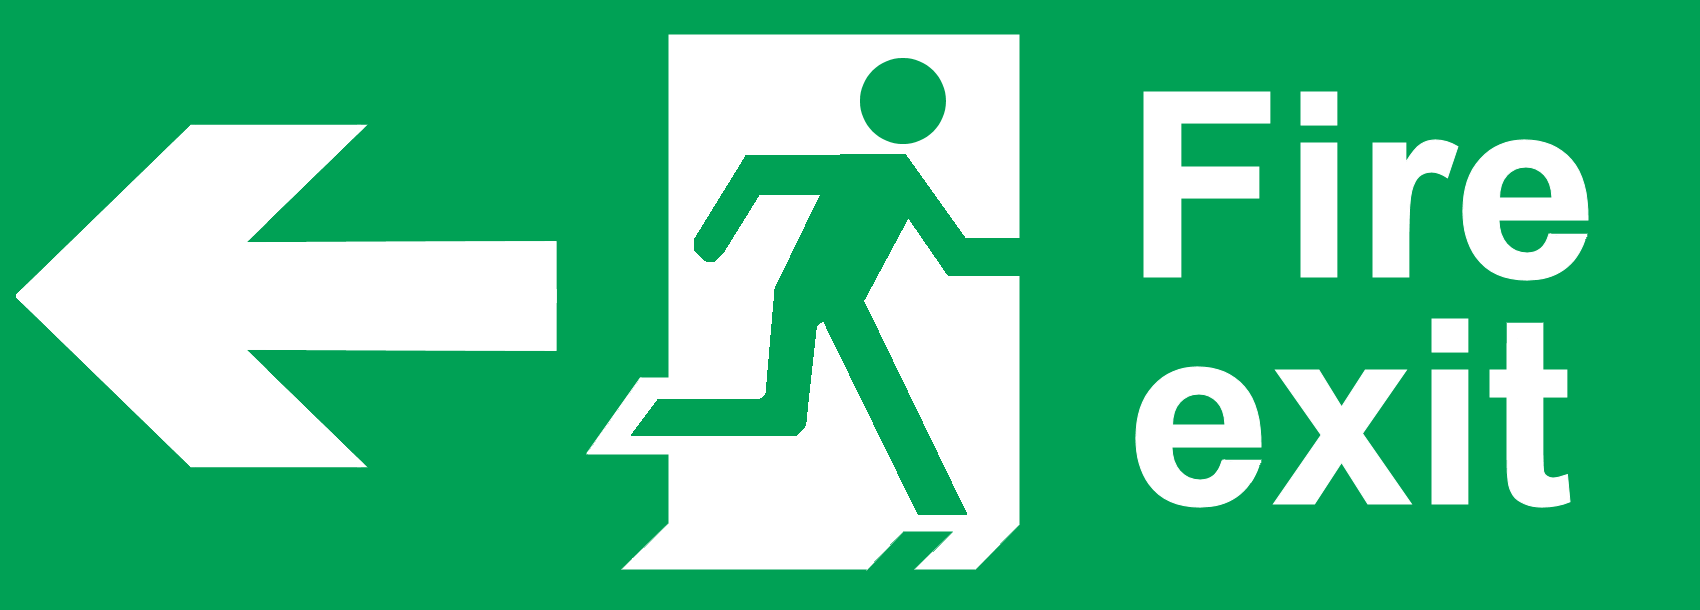 fire exit sign - High quality mobile wallpaper | wallpaper and images